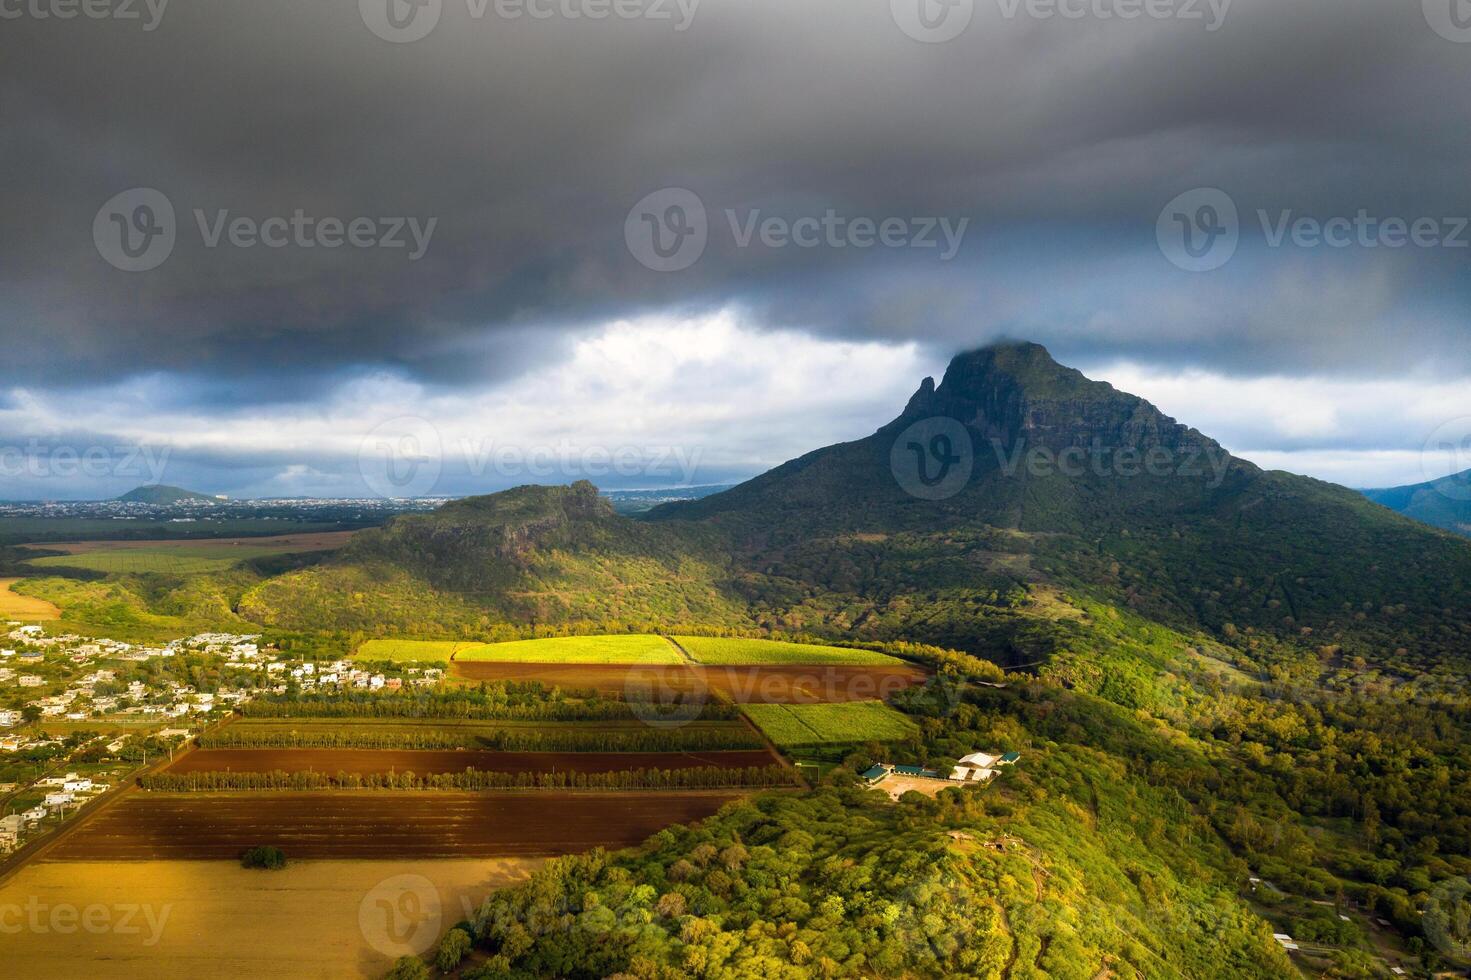 View from the height of the sown fields located on the island of Mauritius photo